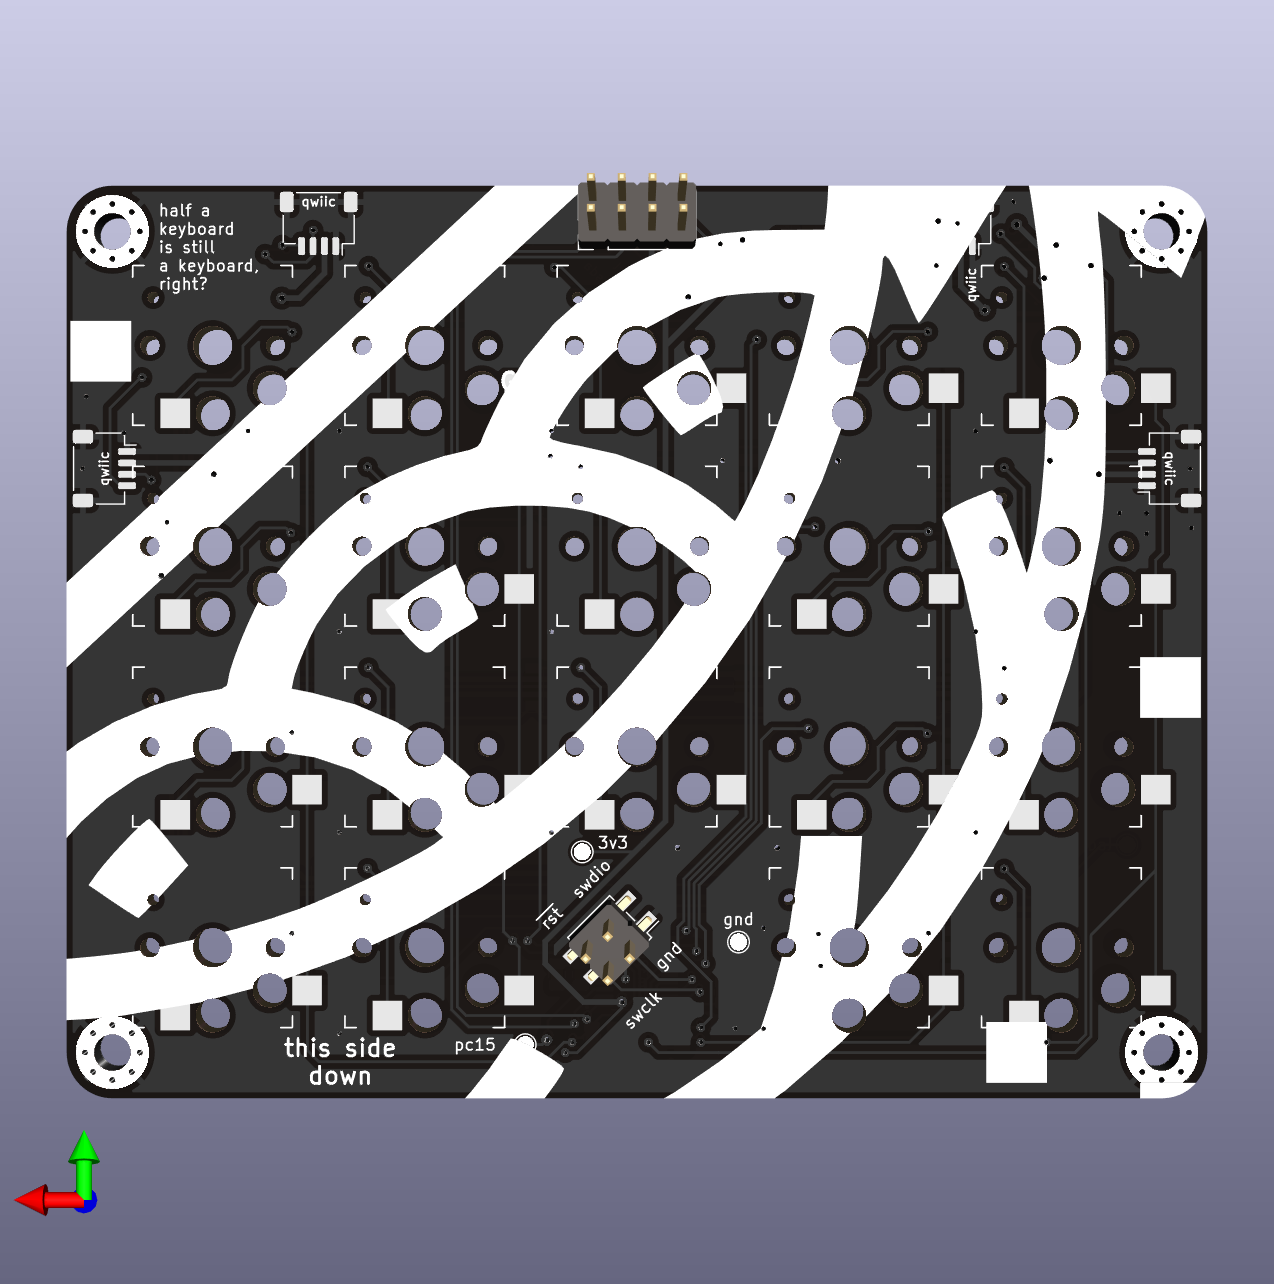 A render of the back side of a 4x5 keyboard PCB